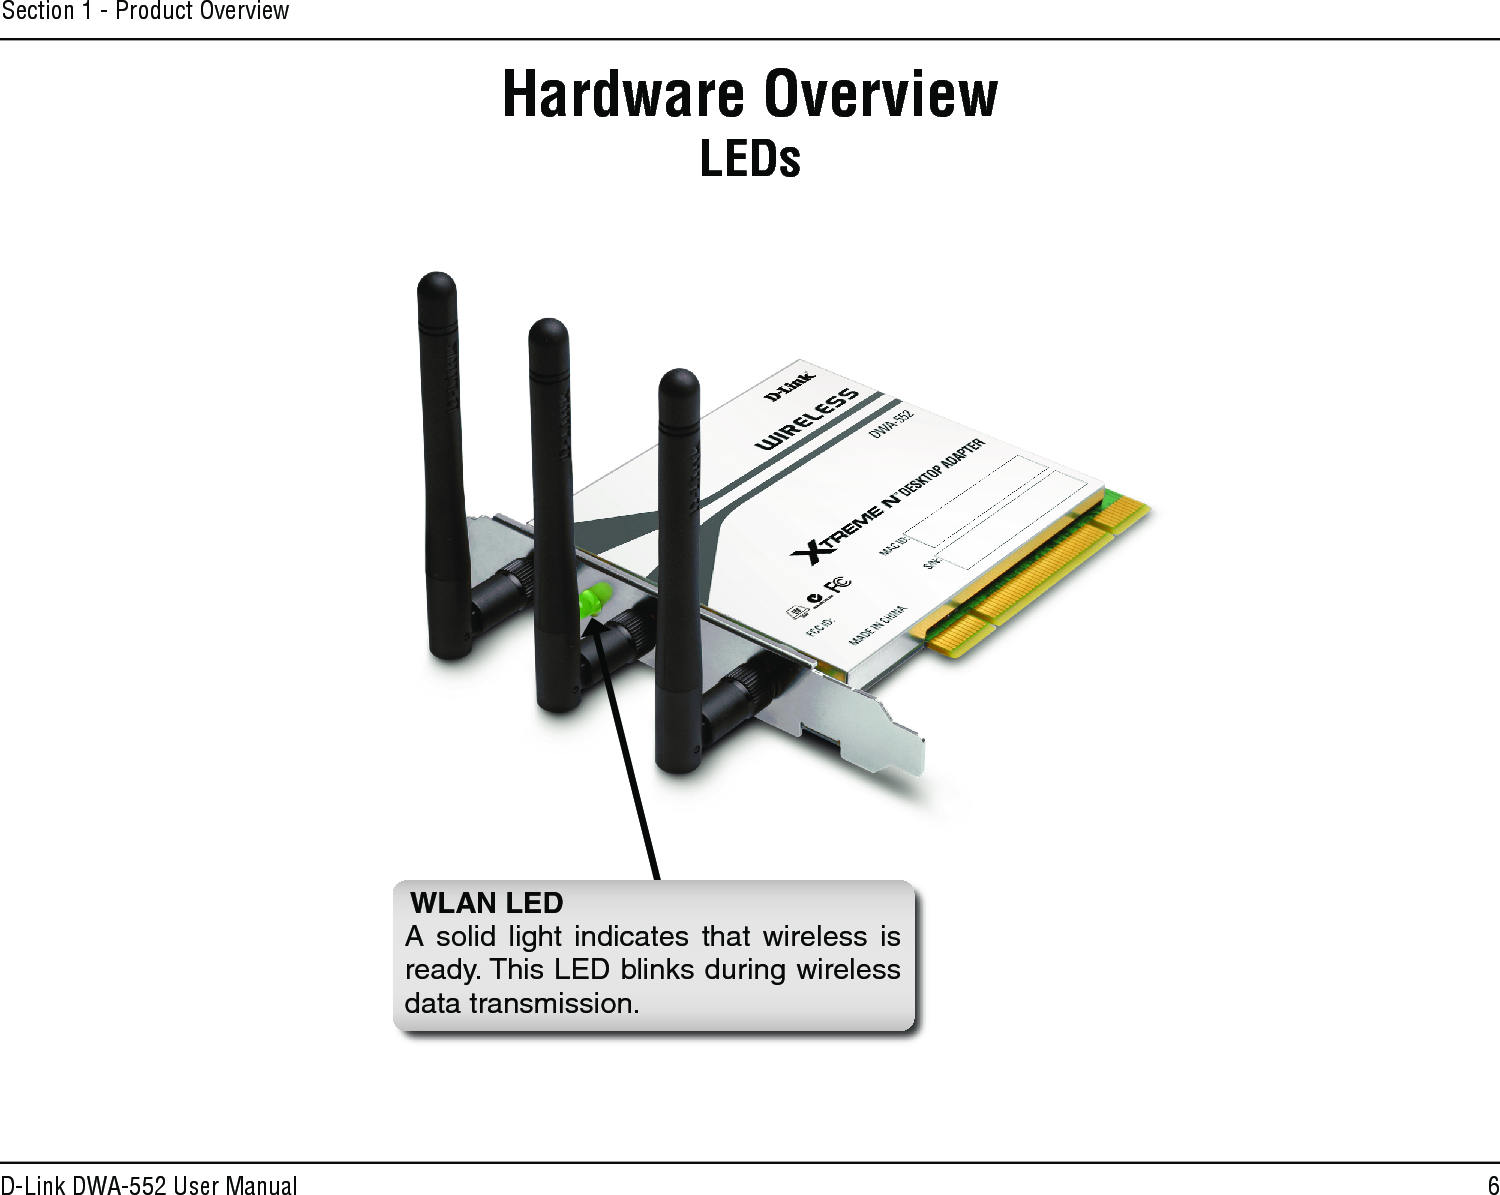 6D-Link DWA-552 User ManualSection 1 - Product OverviewHardware OverviewLEDsWLAN LEDA  solid  light  indicates  that  wireless  is ready. This LED blinks during wireless data transmission.